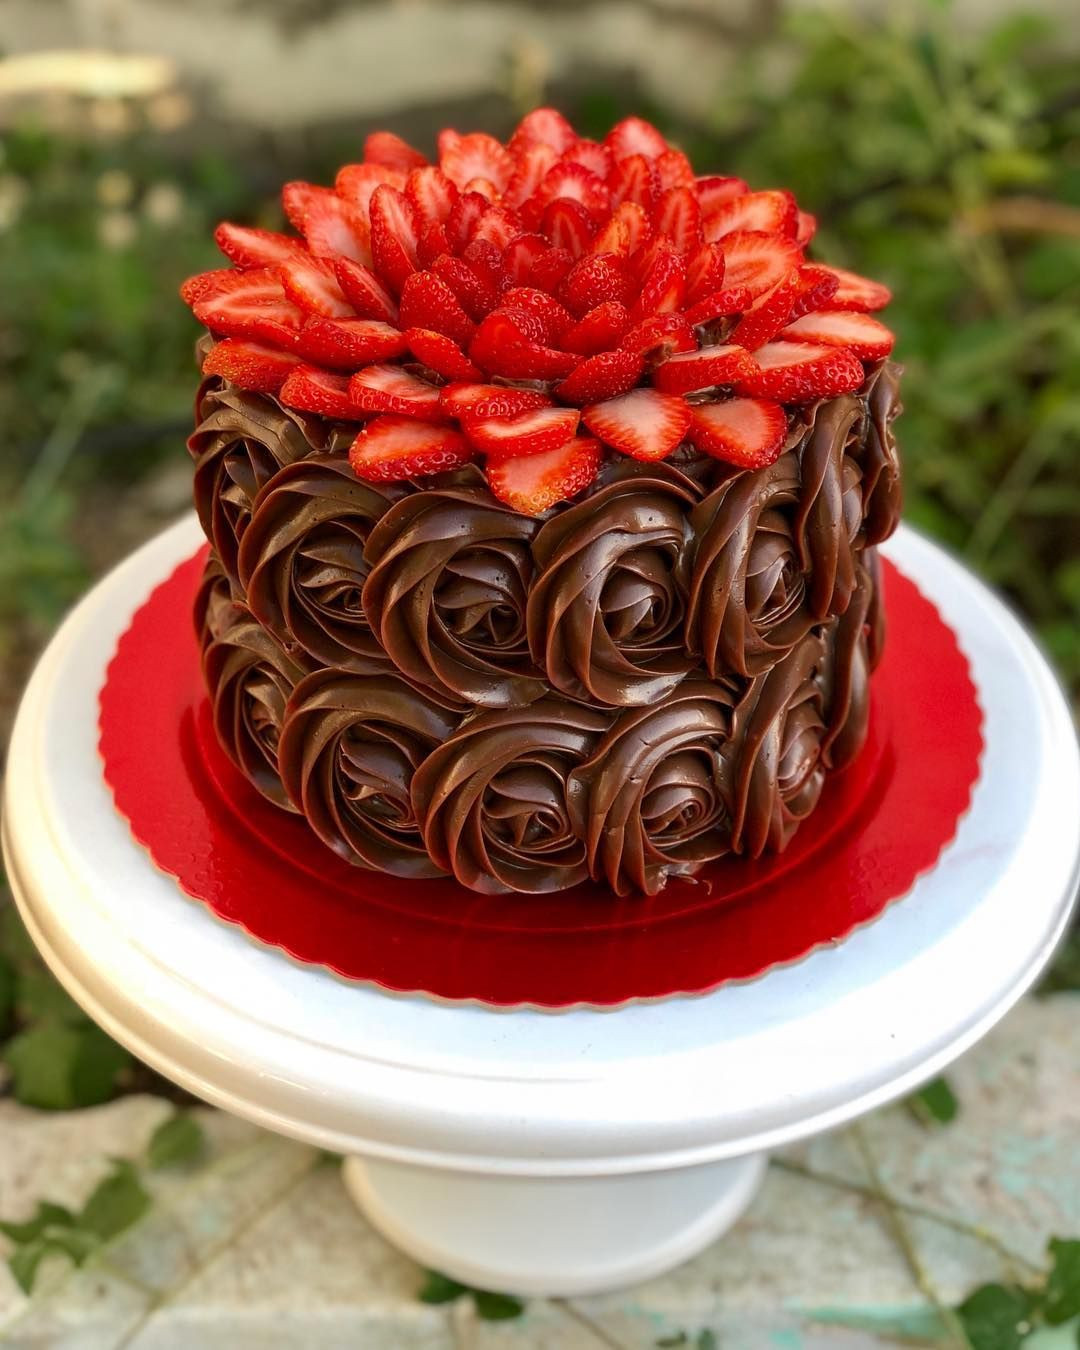 Our 15 Most Popular Beautiful Birthday Cake
 Ever